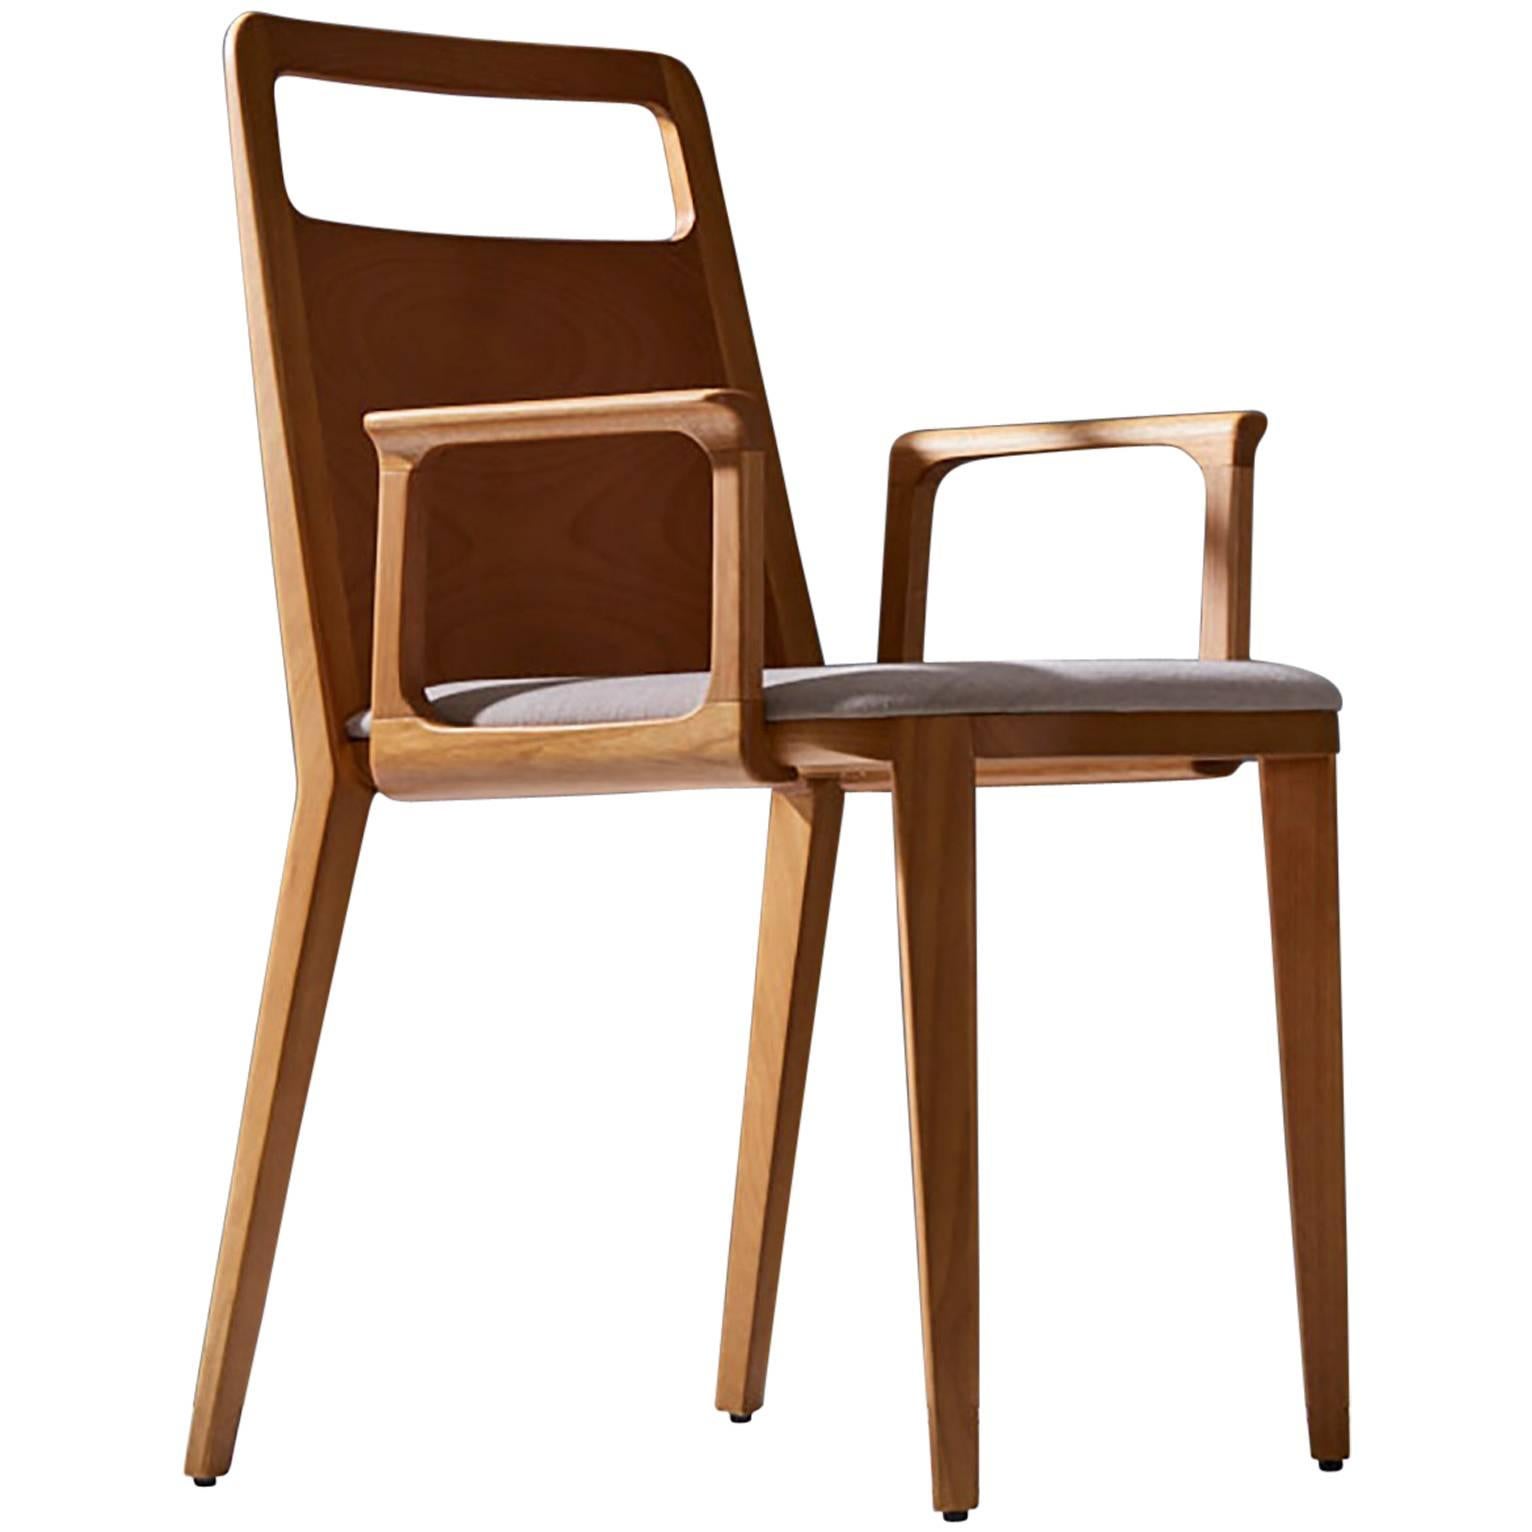 Minimalist solid wood Chair with textile or Leather Upholstery Seating For Sale